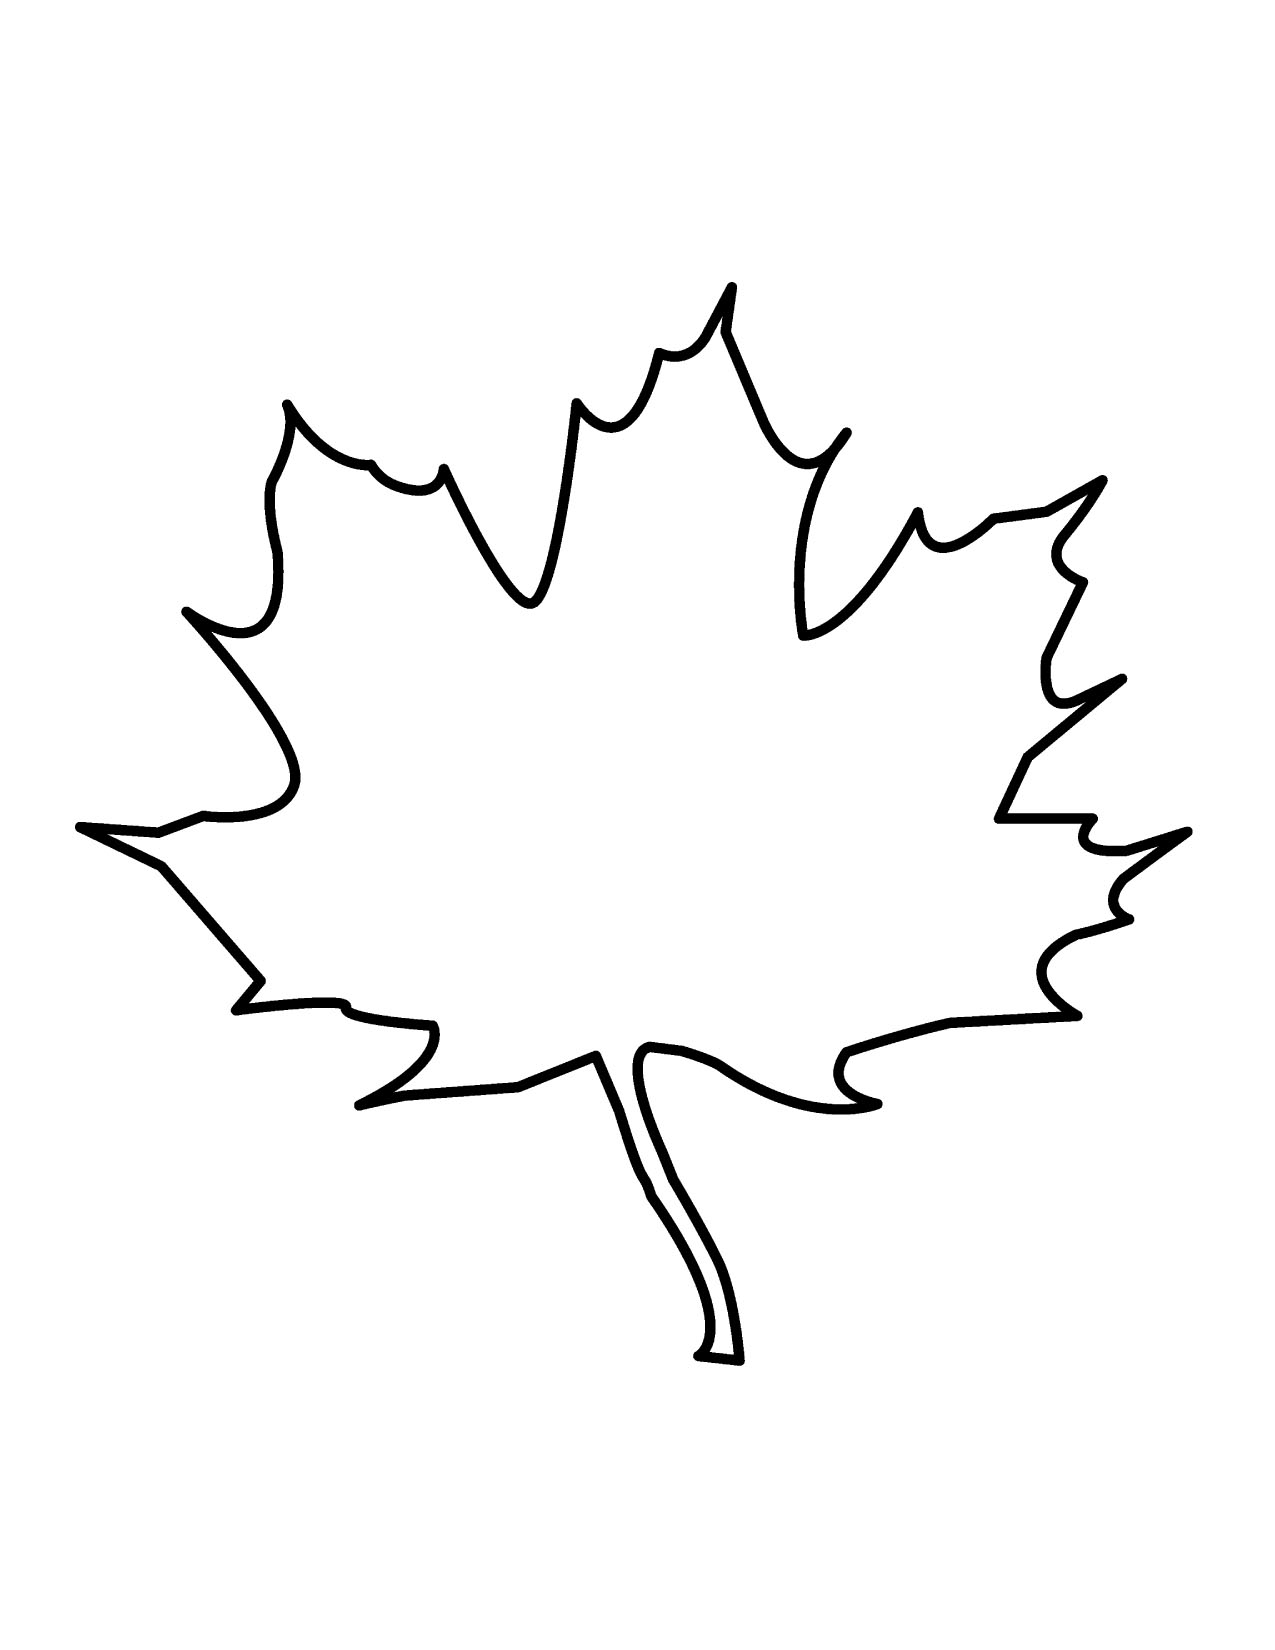 Leaf Clip Art With Lines For Writing | Clipart Panda - Free ...